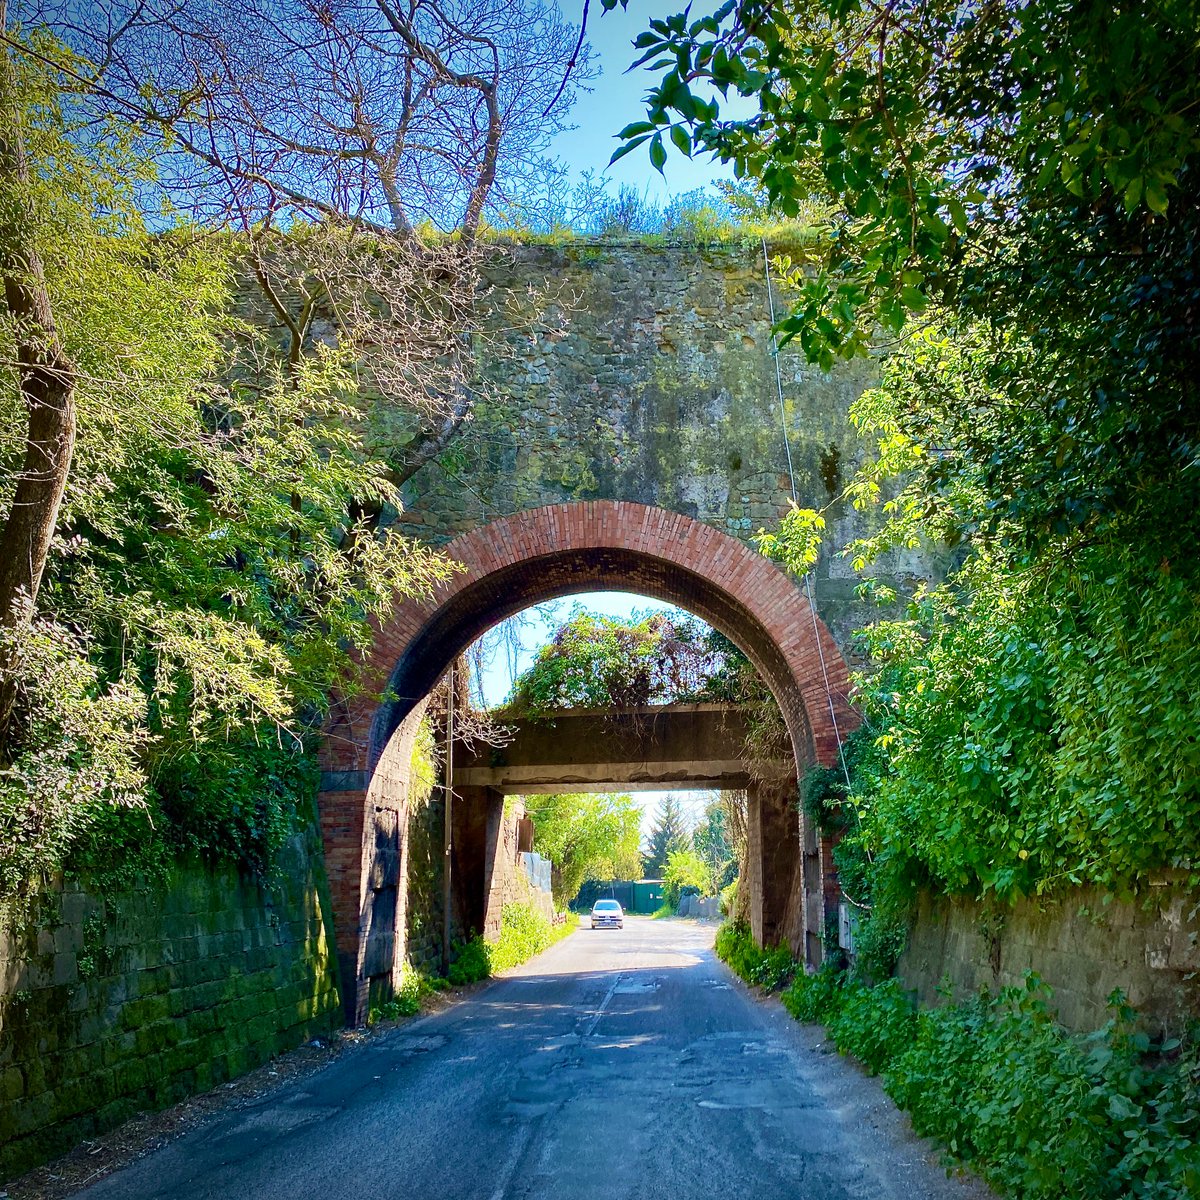 From the Parco degli Acquedotti, we had to get off the beaten path to reach the Parco della Caffarella. We took a wrong turn once or twice, but we were always greeted by something special, from a wonderful old bridge to some amazing abandoned villas!